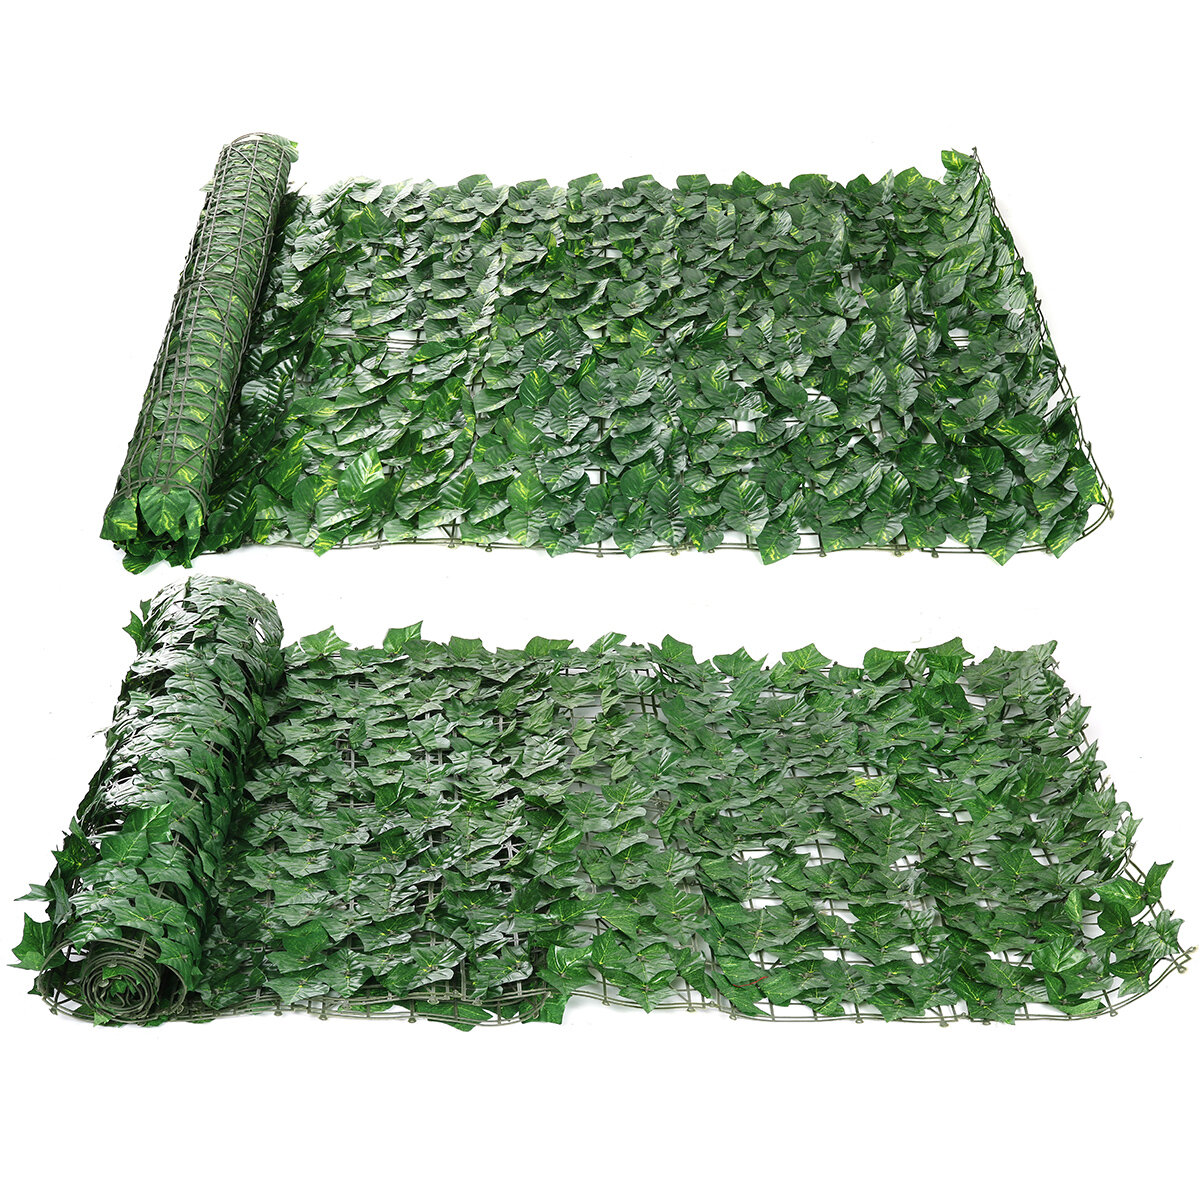 

3x1M Outdoor Artificial Faux Ivy Leaf Privacy Fence Screen Decor Panels Hedge Garden Wall Cover